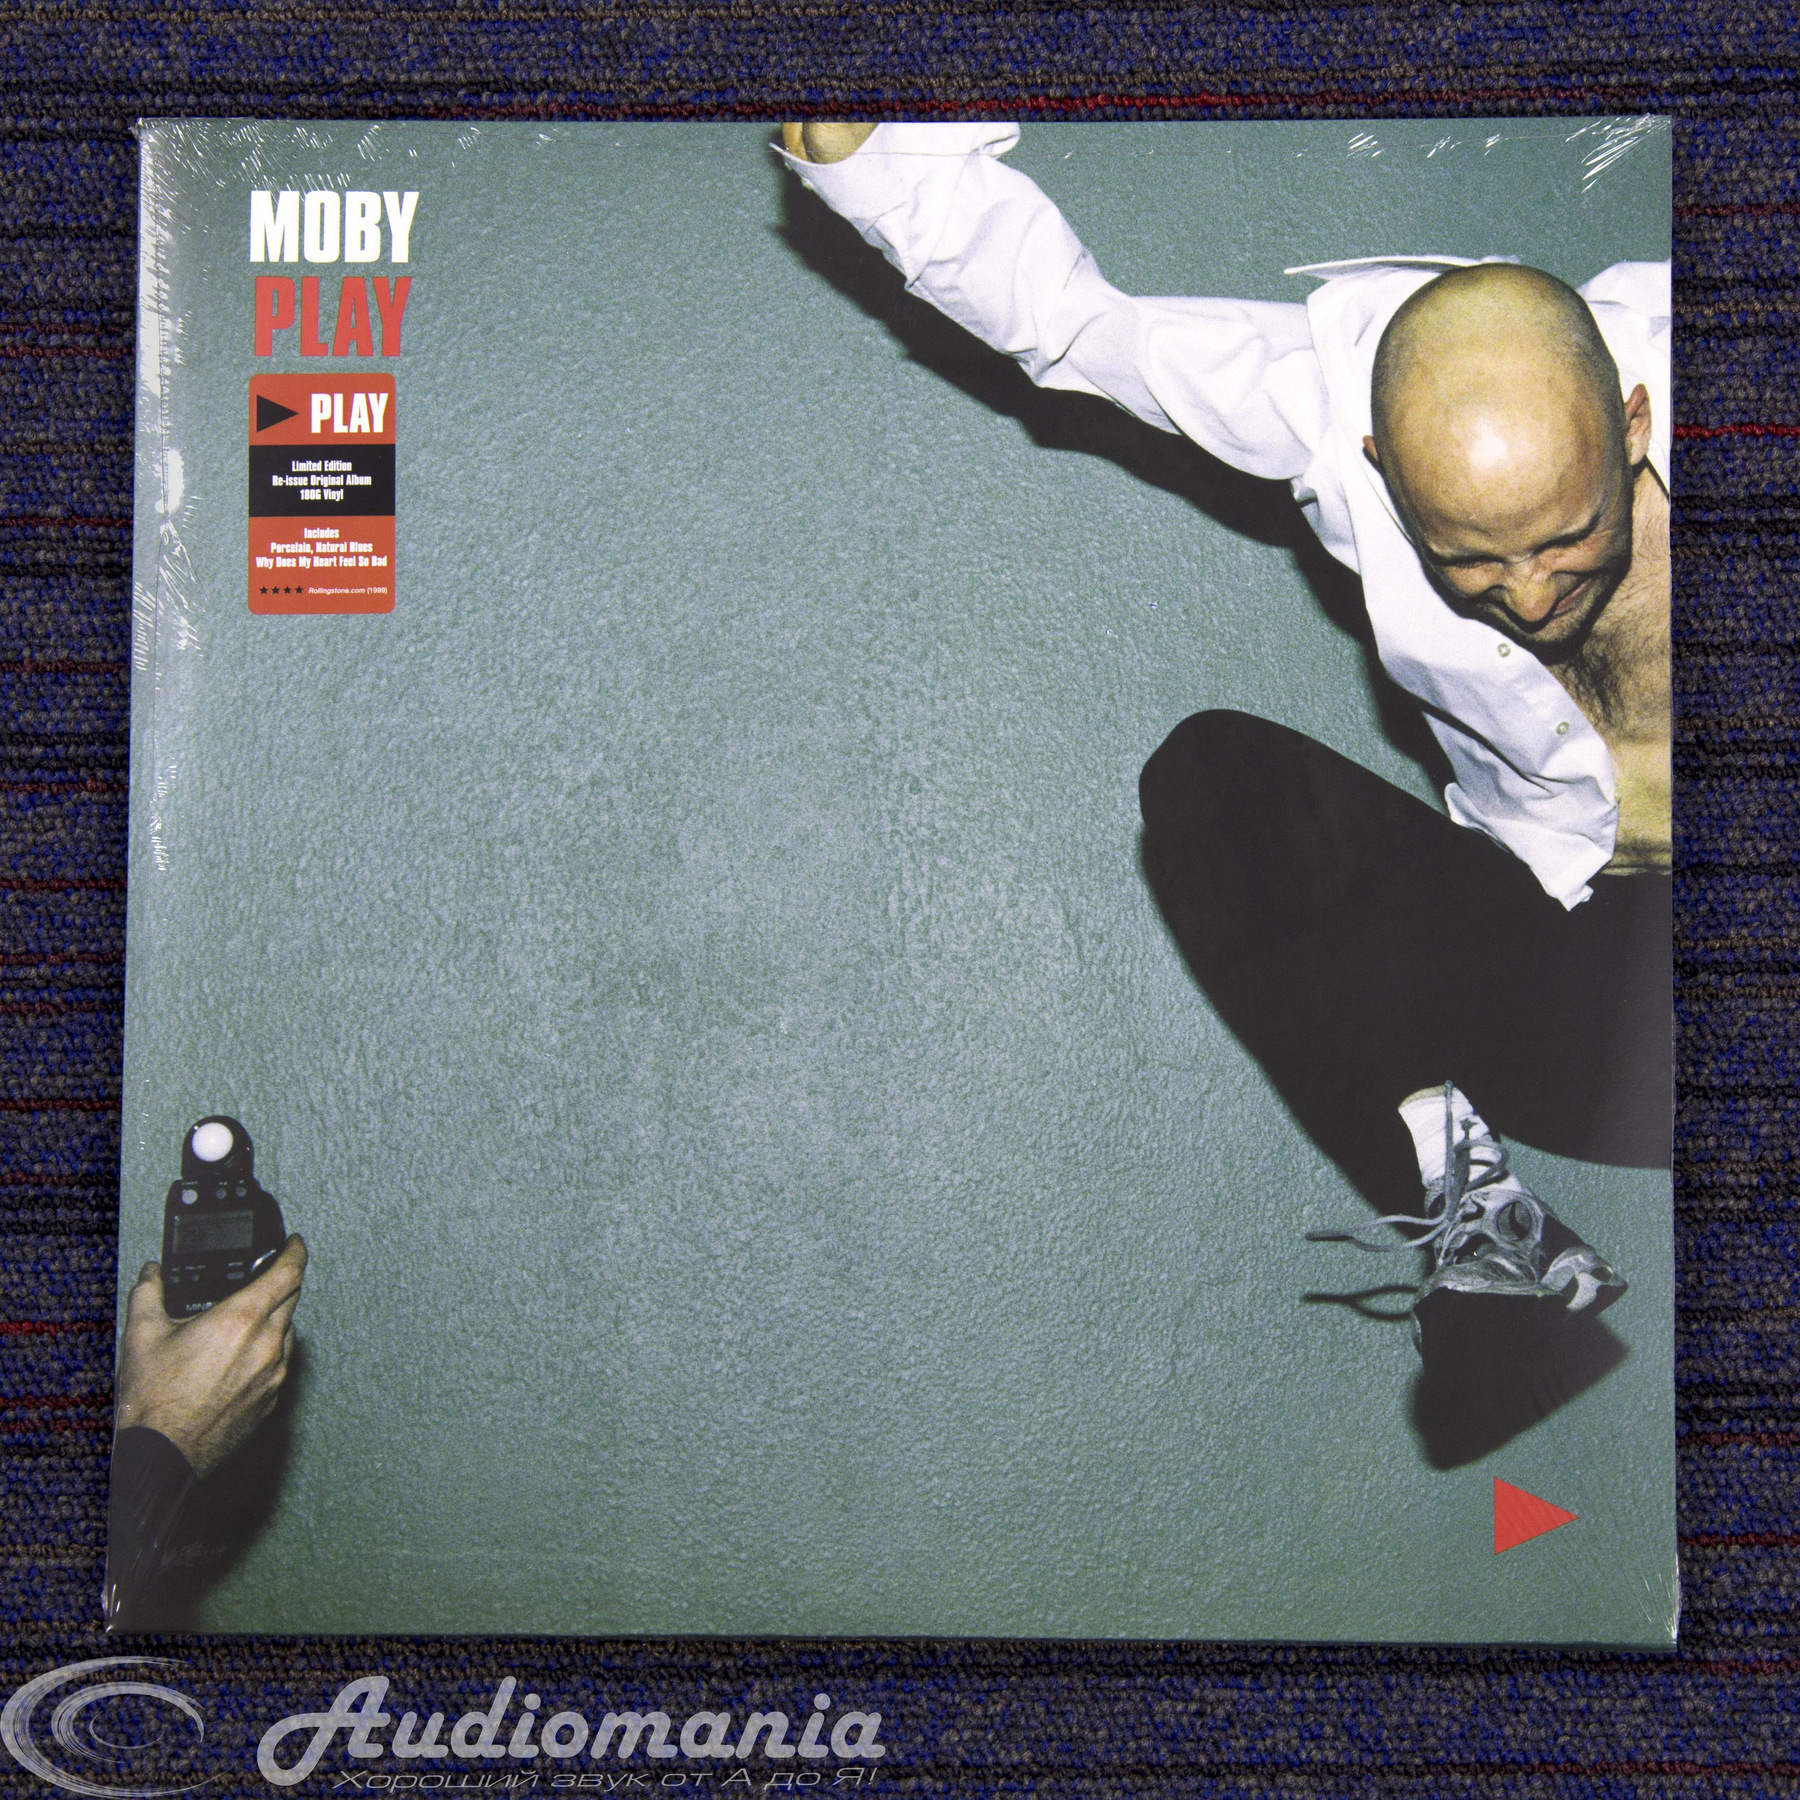 Play Moby пластинка. Виниловые пластинки Moby. Moby альбомы.